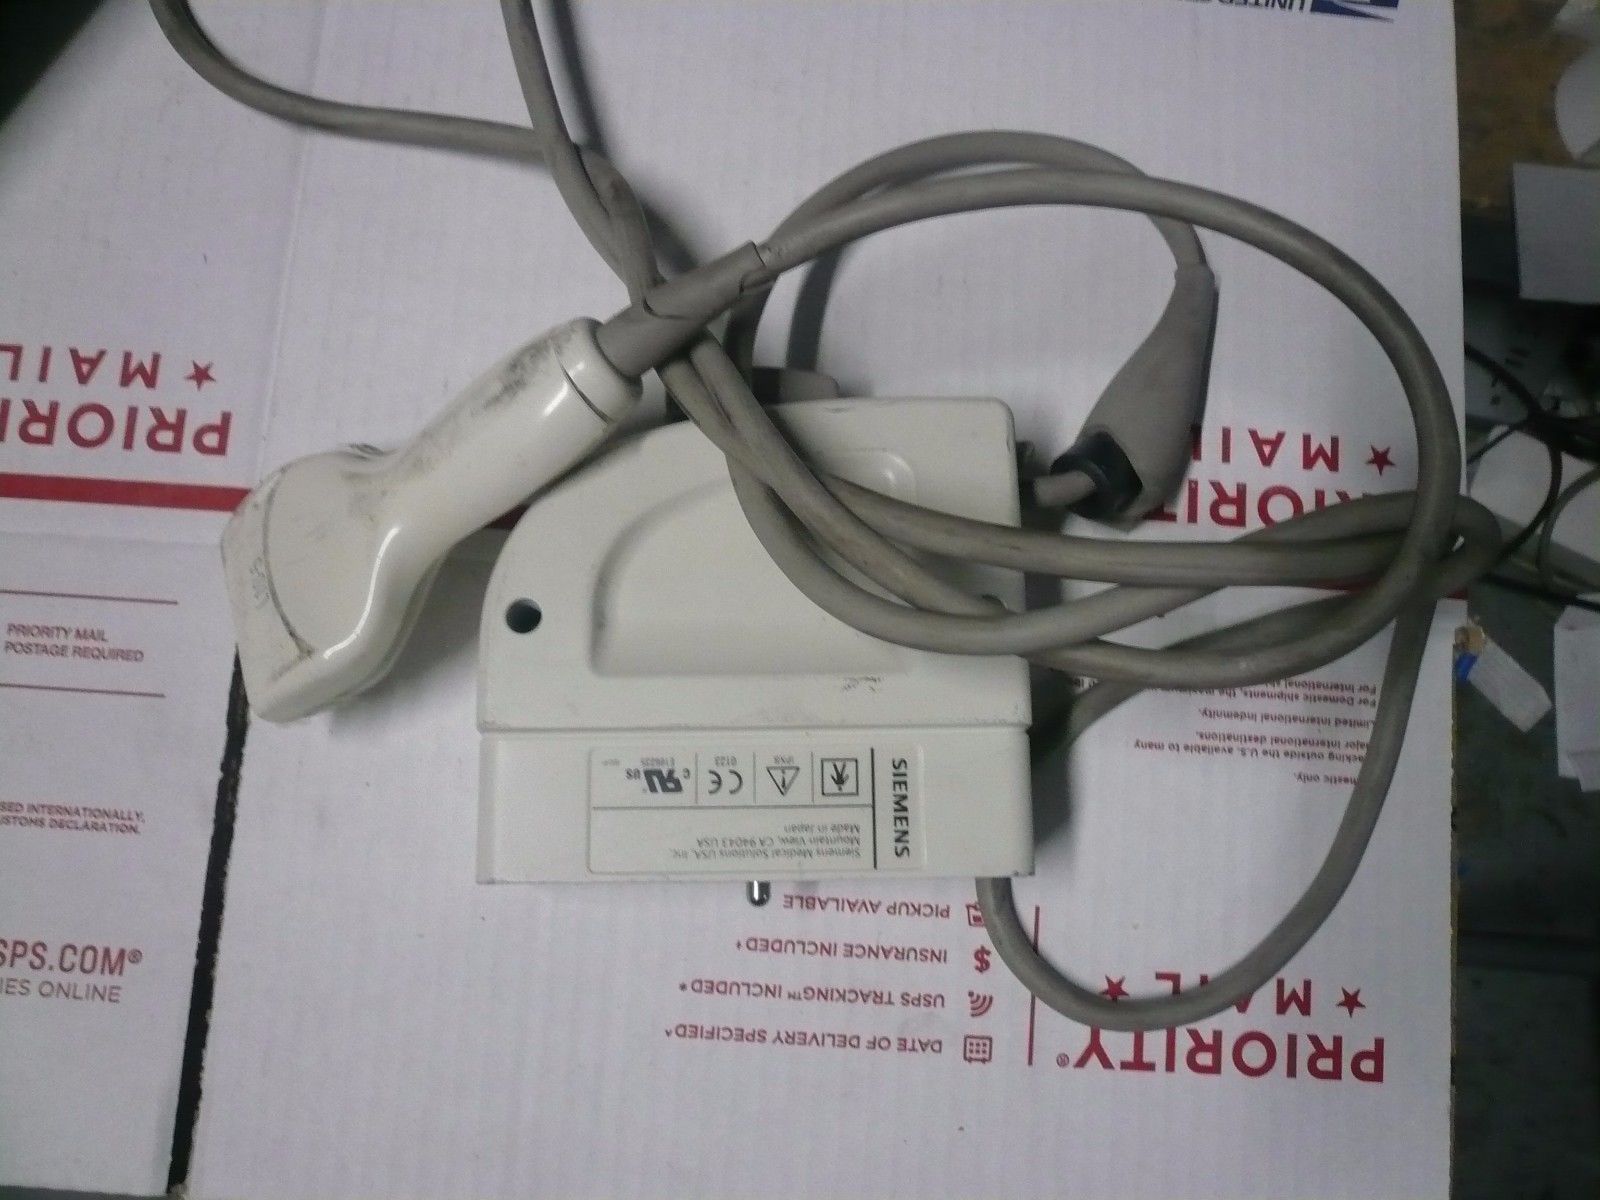 Siemens L10-5 Linear Array Ultrasound Transducer Probe  FOR PARTS BROKEN AS IS DIAGNOSTIC ULTRASOUND MACHINES FOR SALE